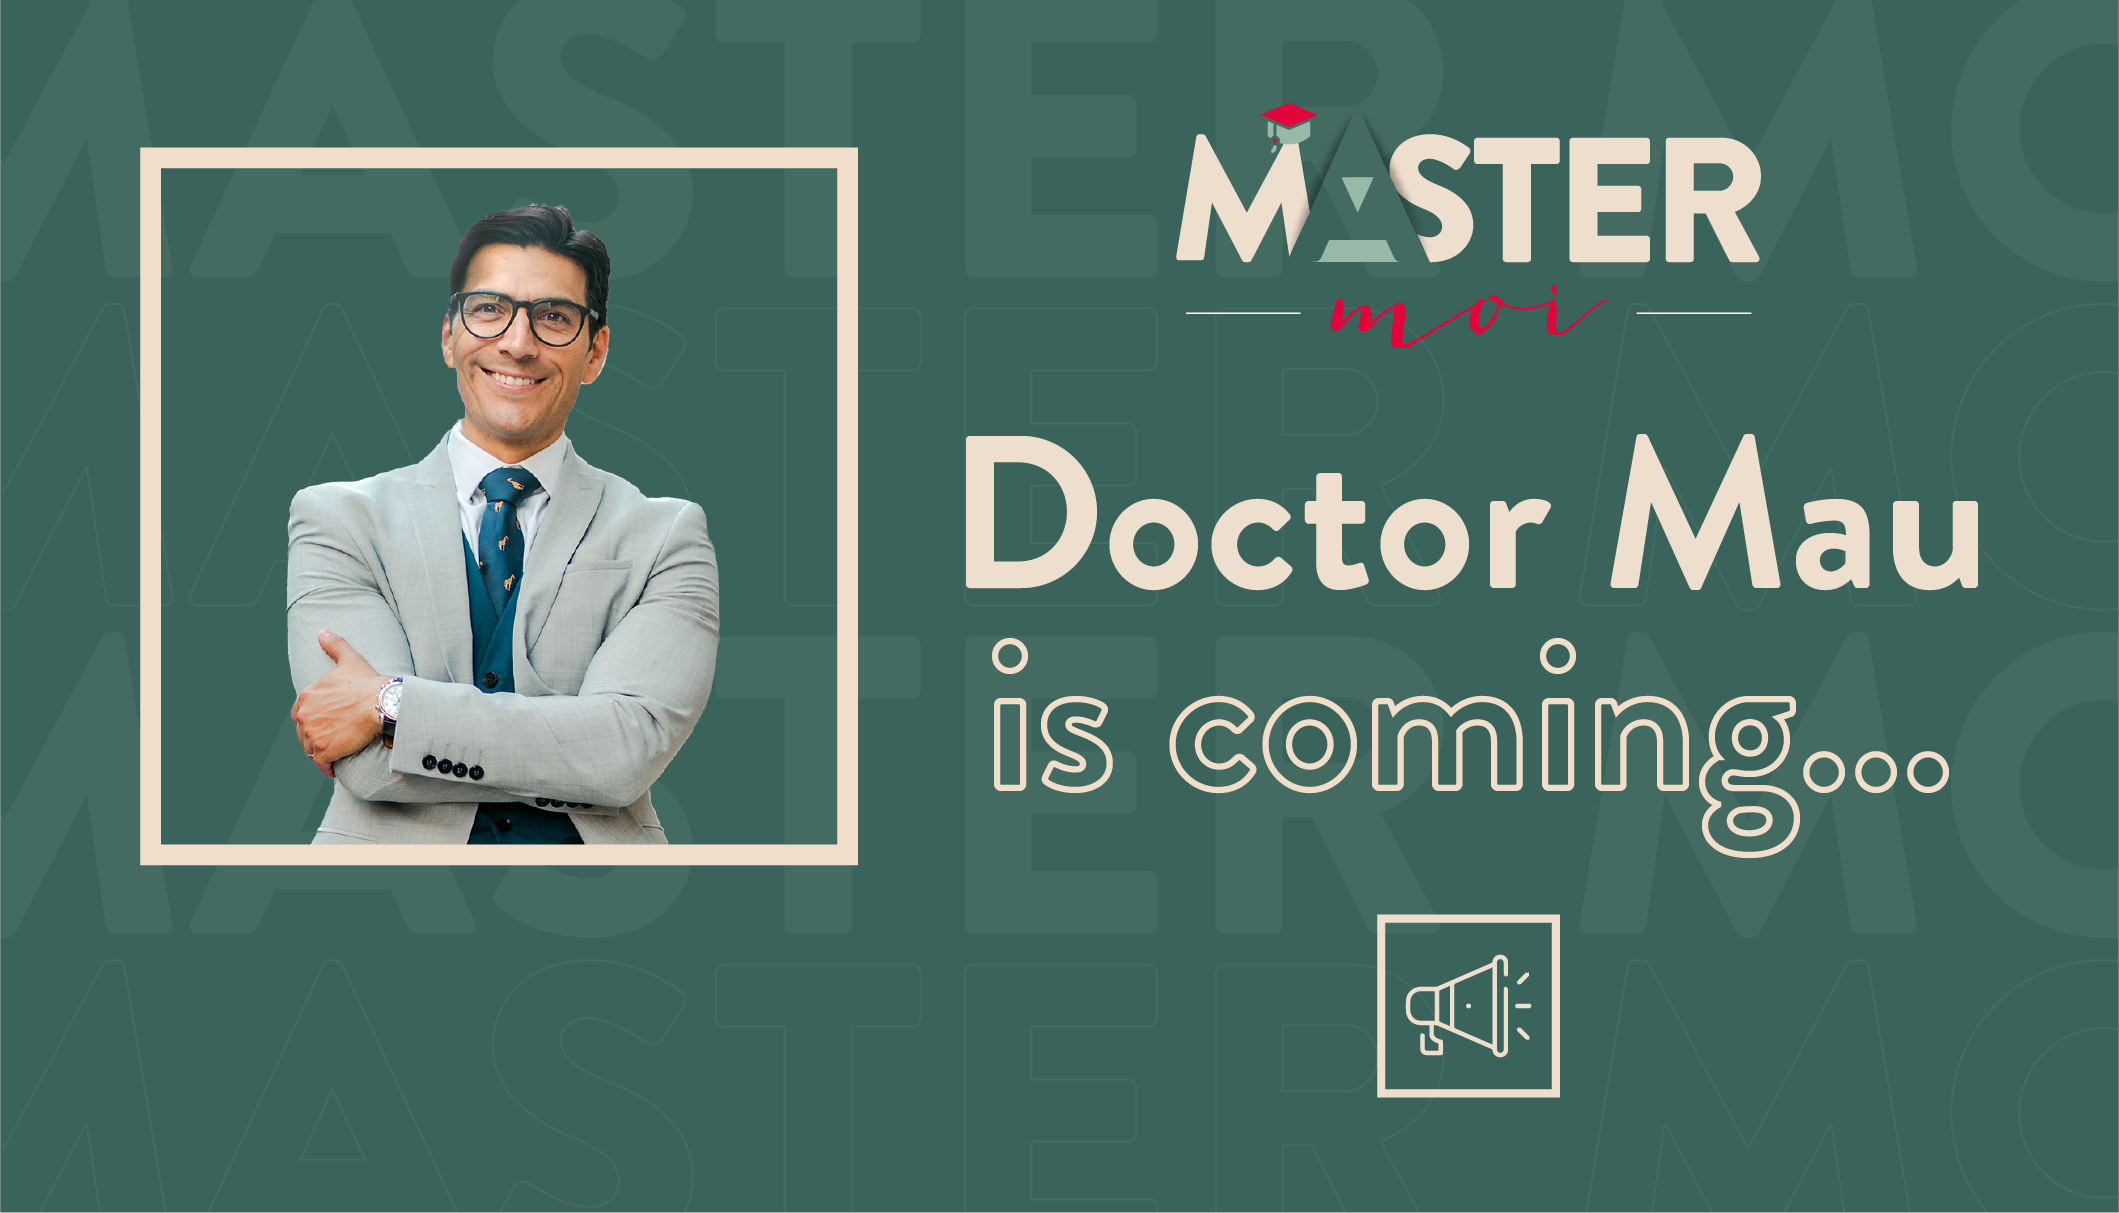 Doctor Mau is coming... ¡a Master moi 2023!